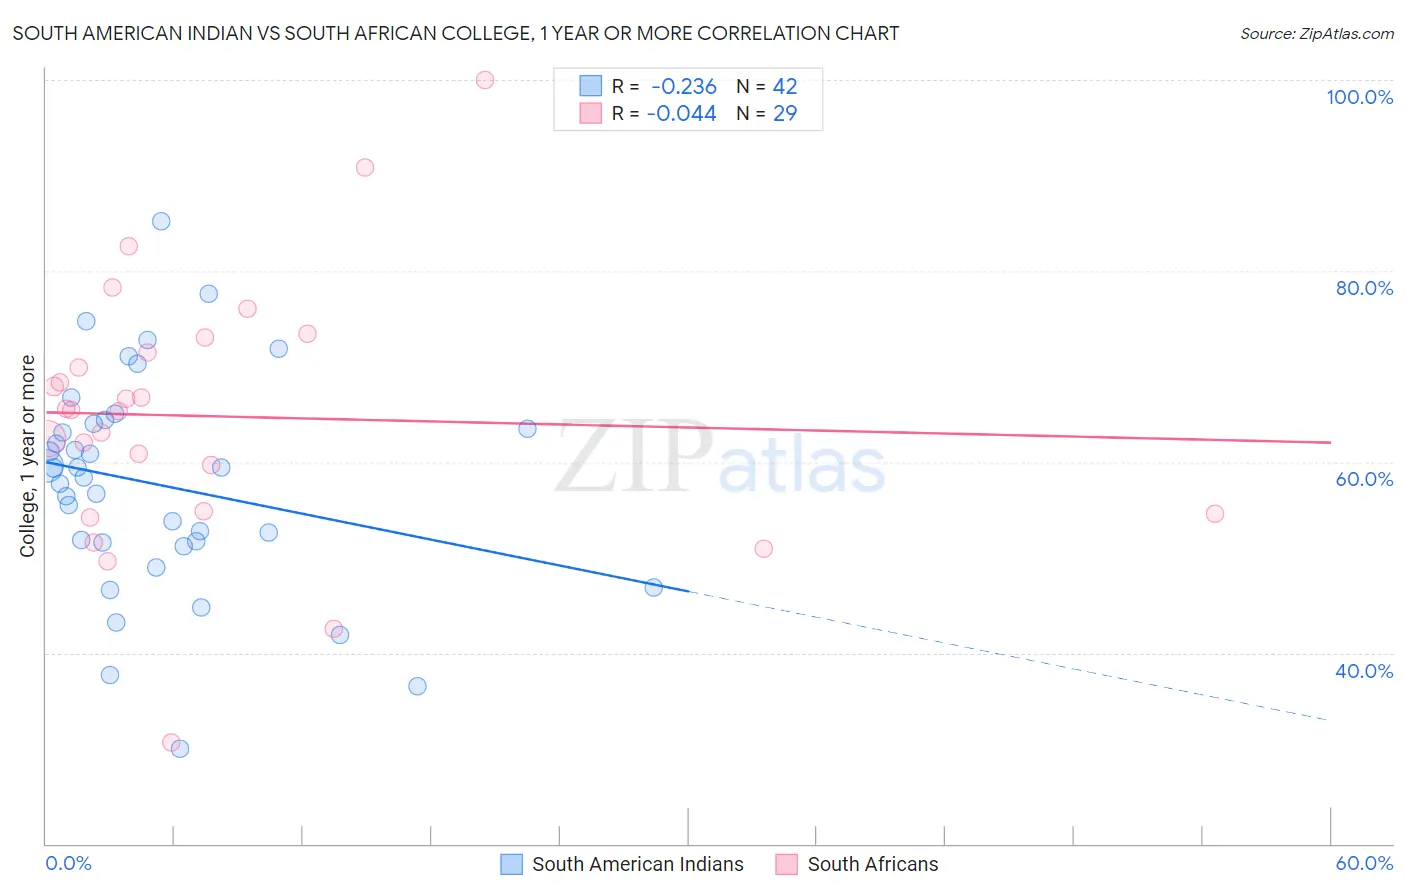 South American Indian vs South African College, 1 year or more